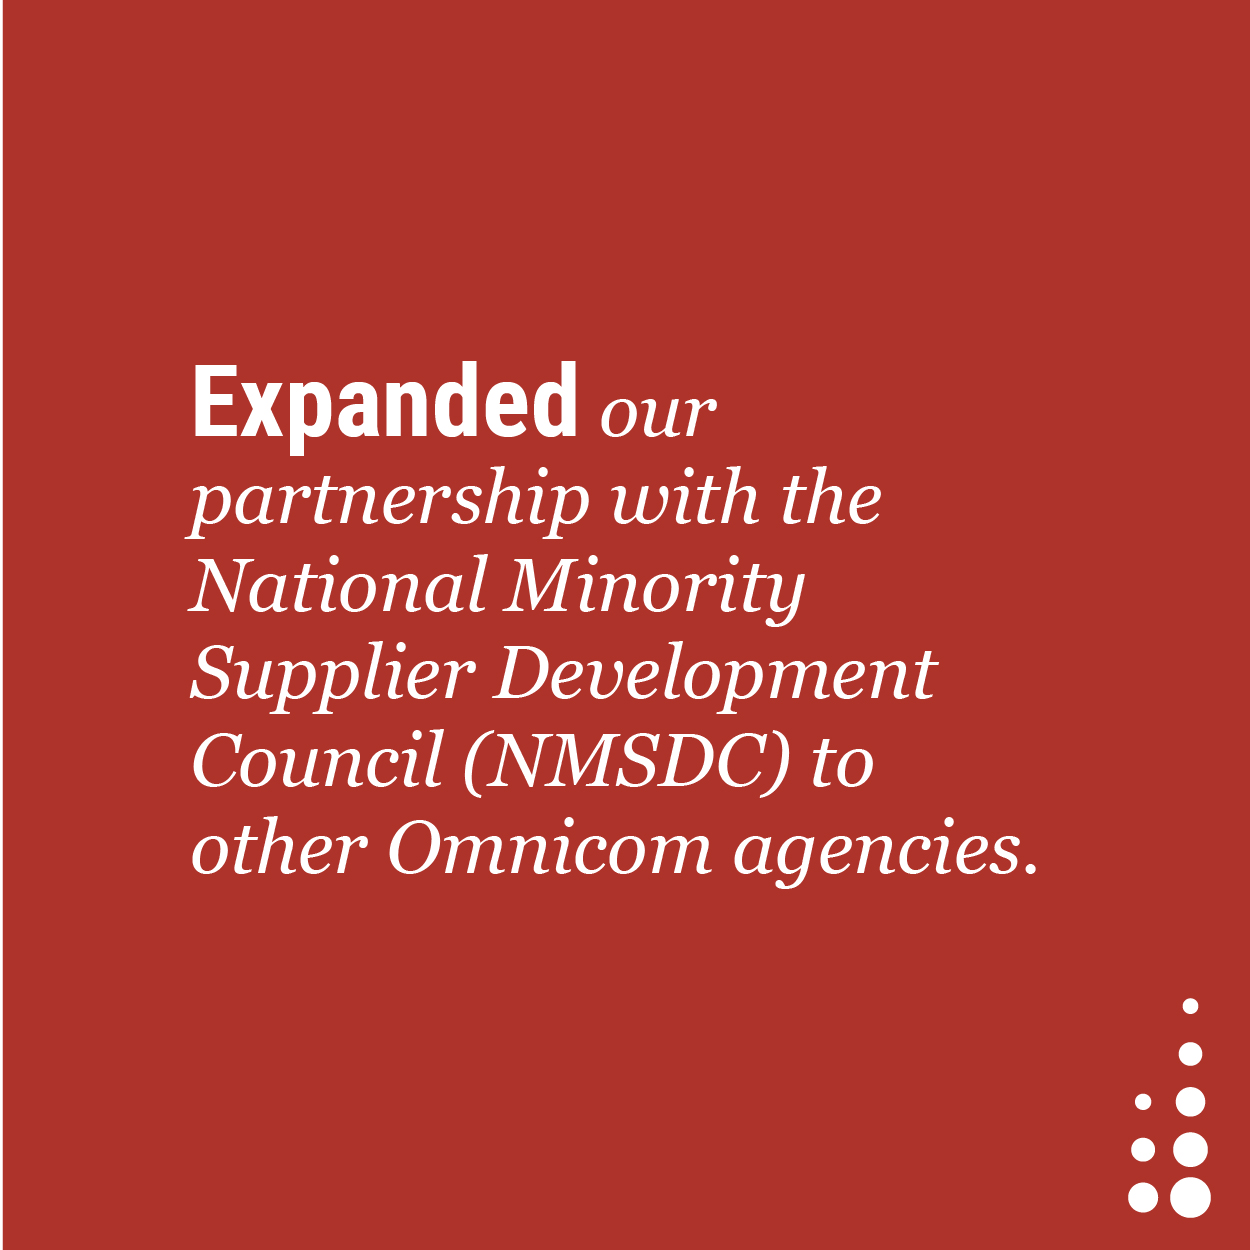 Expanded our partnership with the National Minority Supplier Development Council (NMSDC) to other Omnicom agencies.